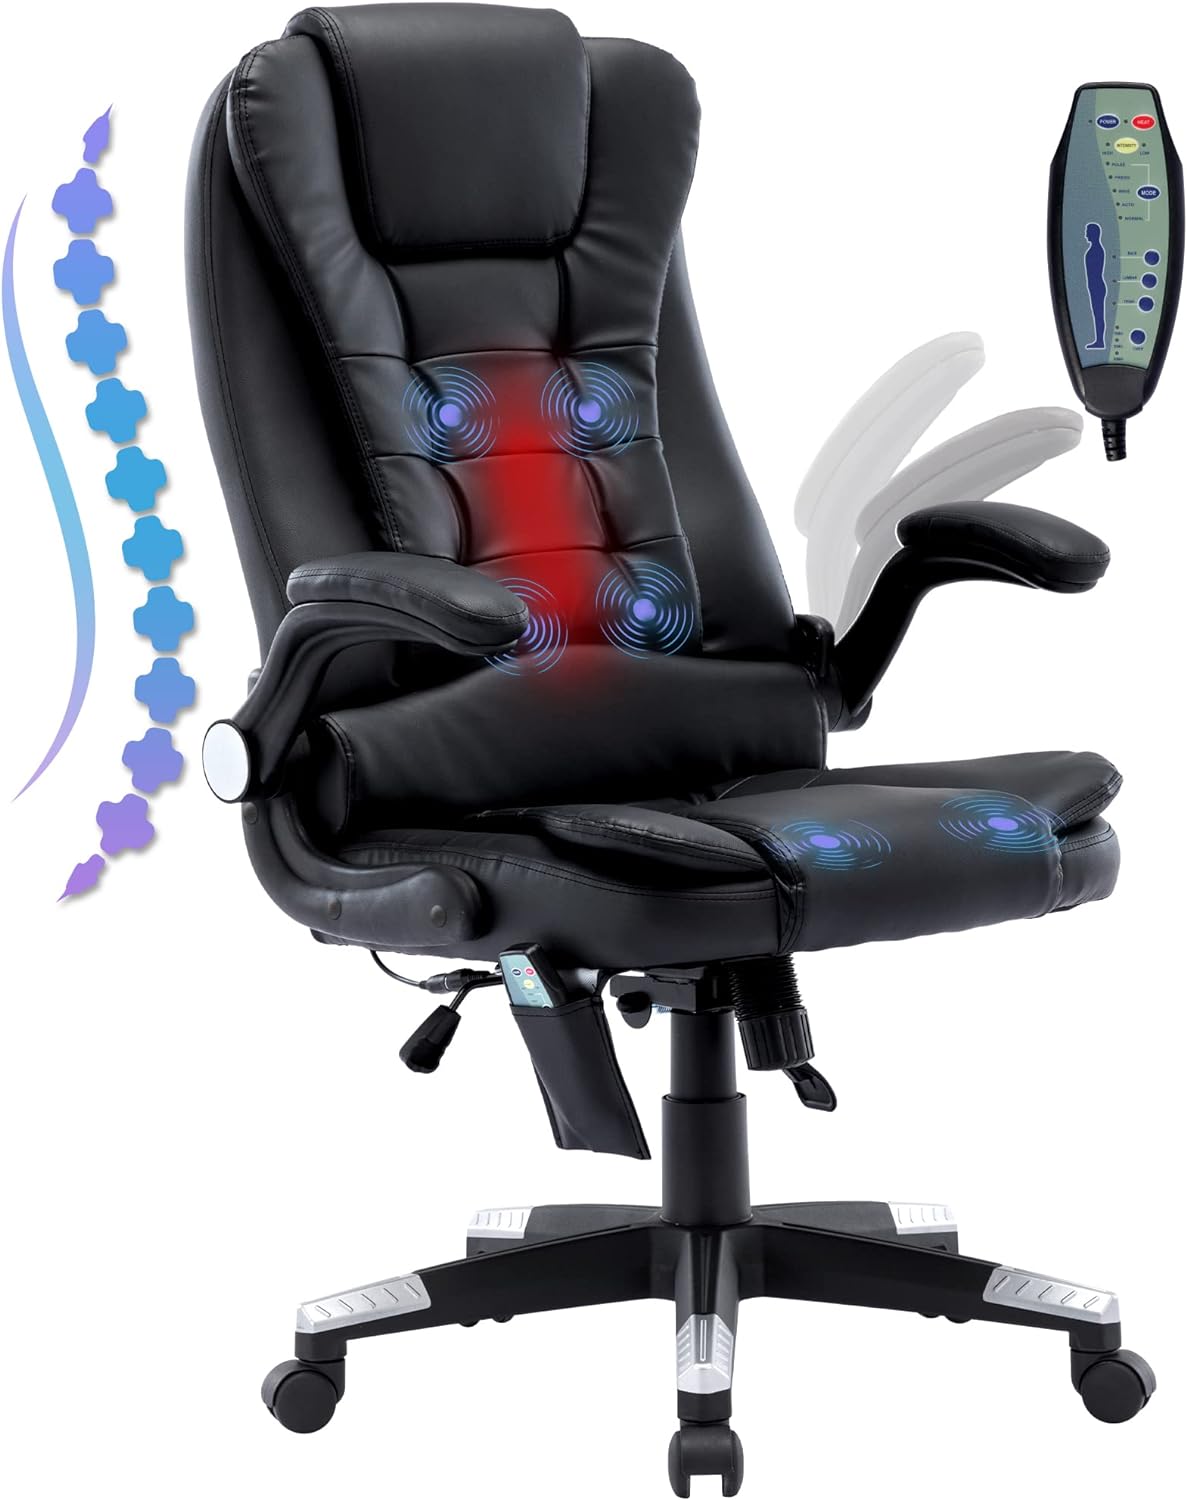 Ergonomic Executive Office Chair with Massage, Flip-up Armrests, and Back Support